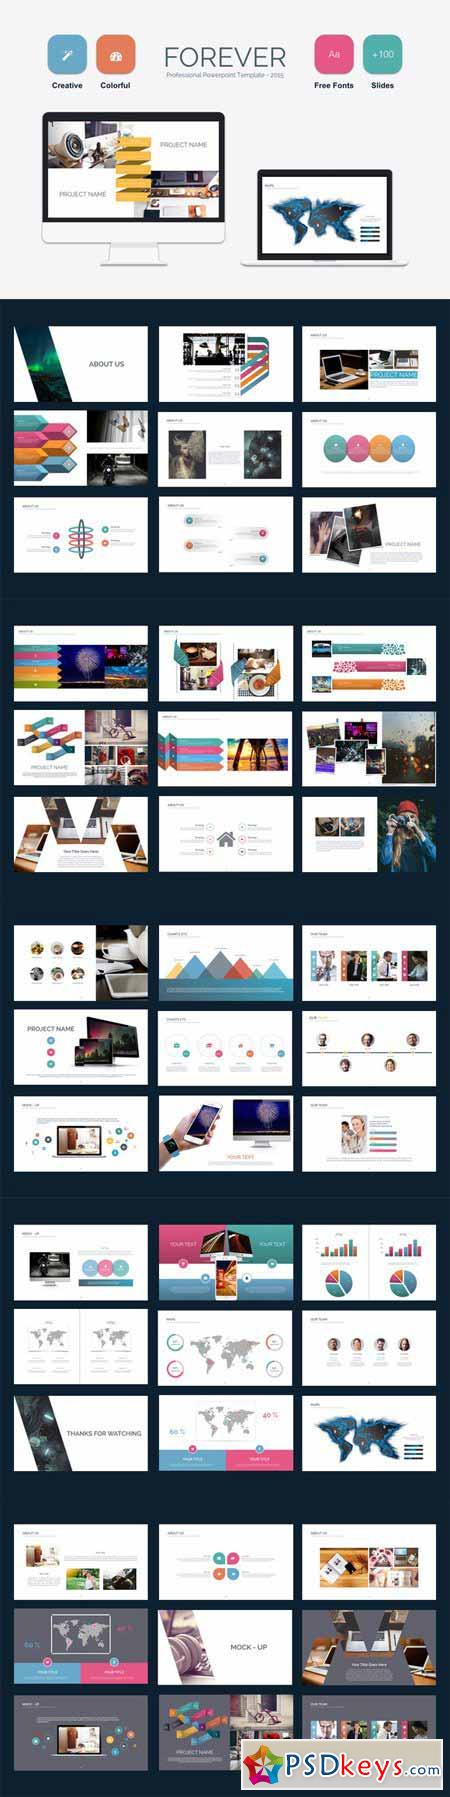 Forever Powerpoint Template 507034